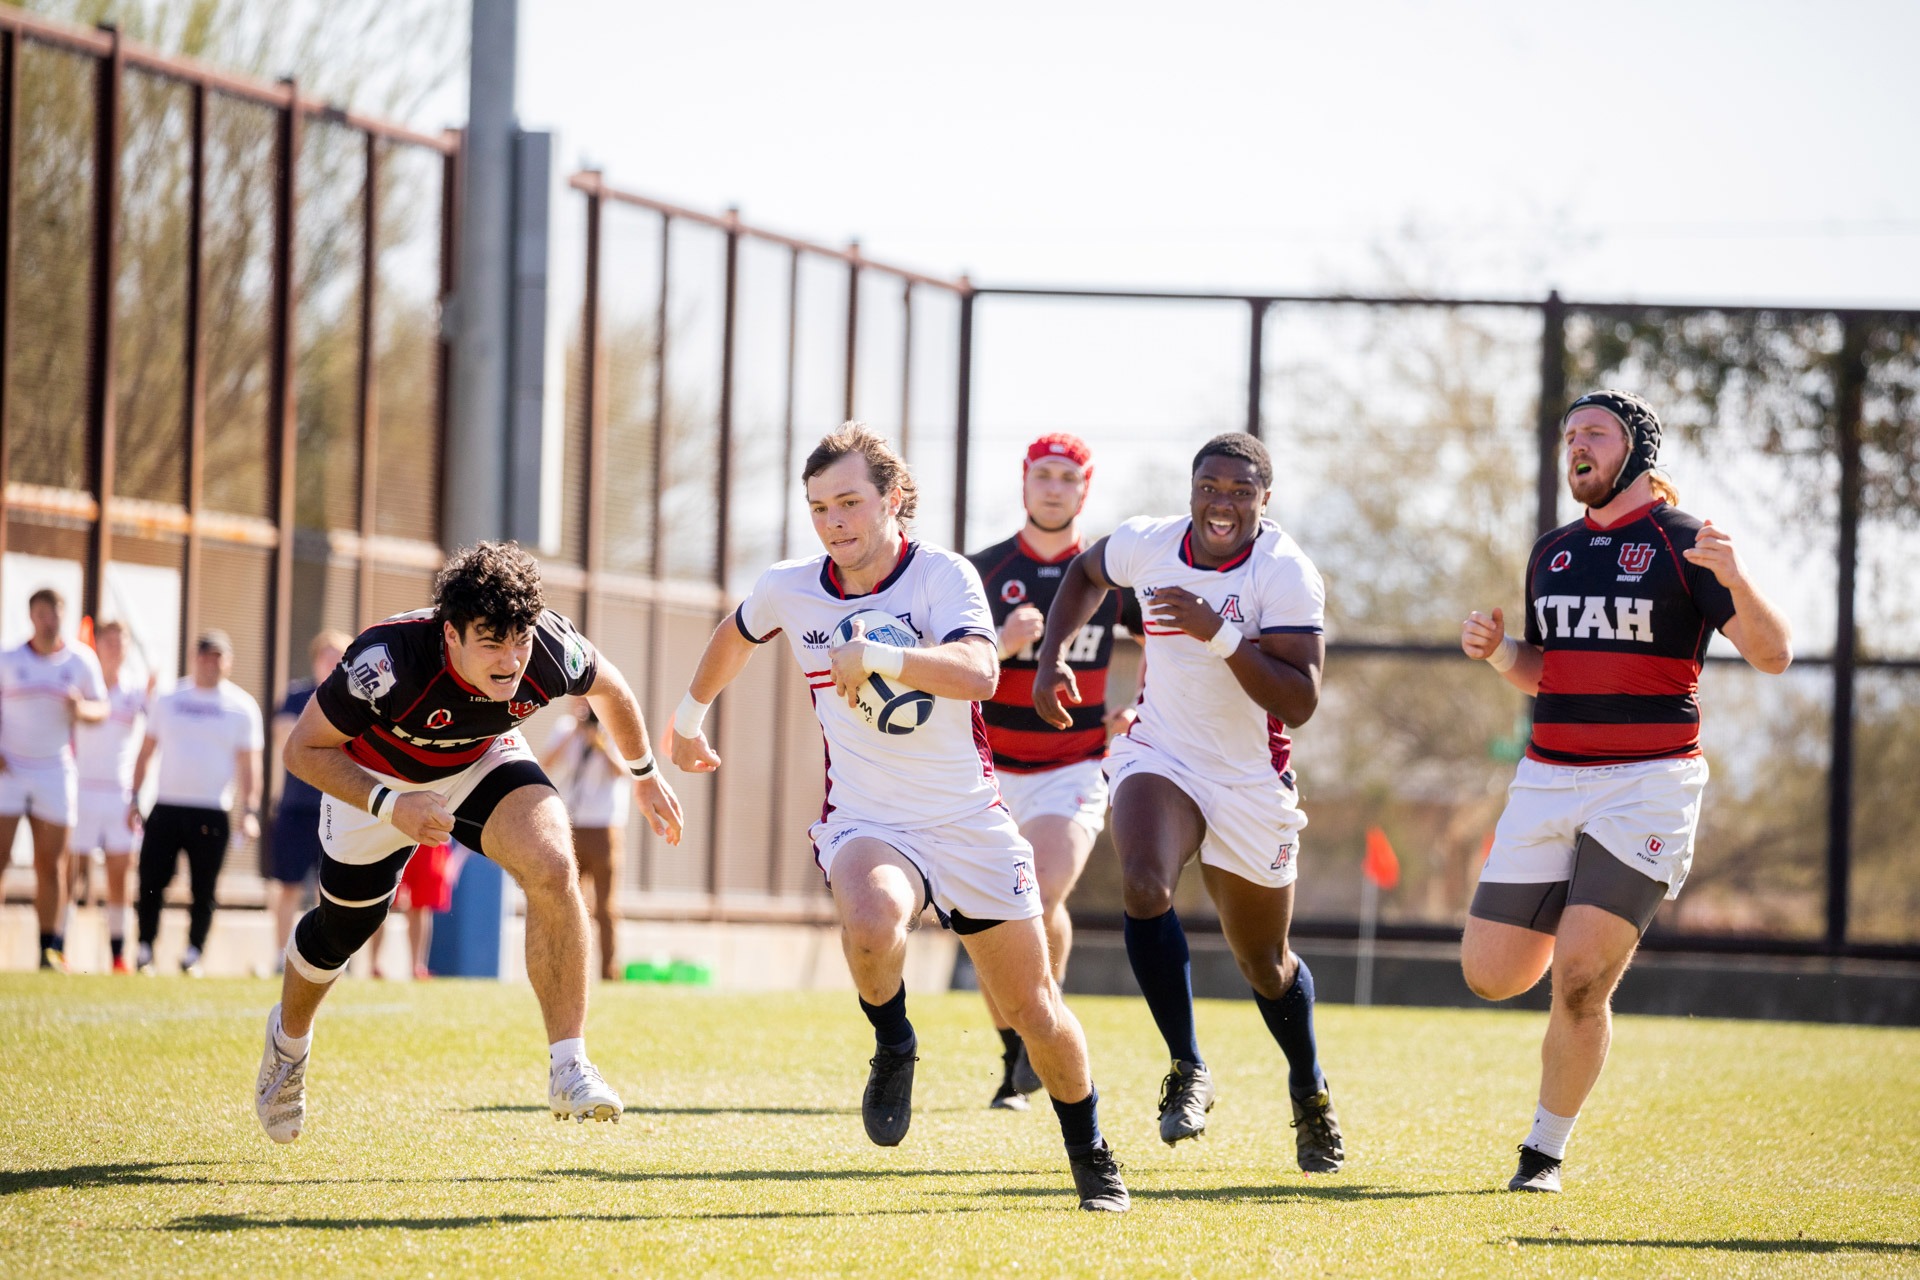 A photograph of the UArizona and Utah rugby team playing on the field